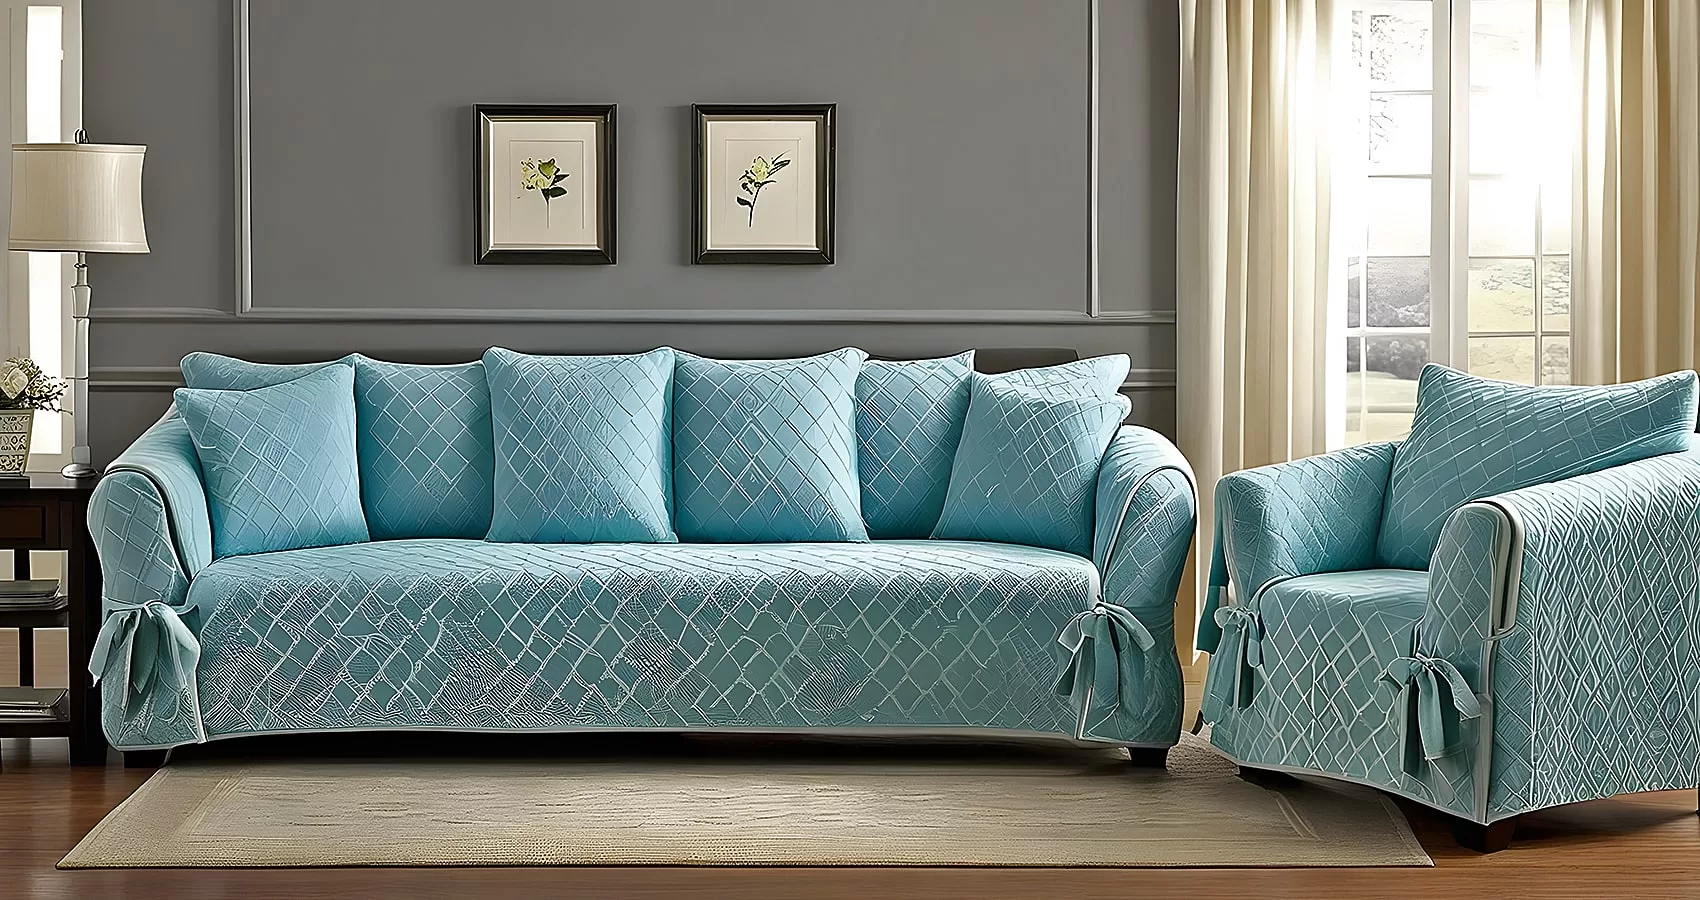 Blue Couch Covers | Blue Sofa Covers